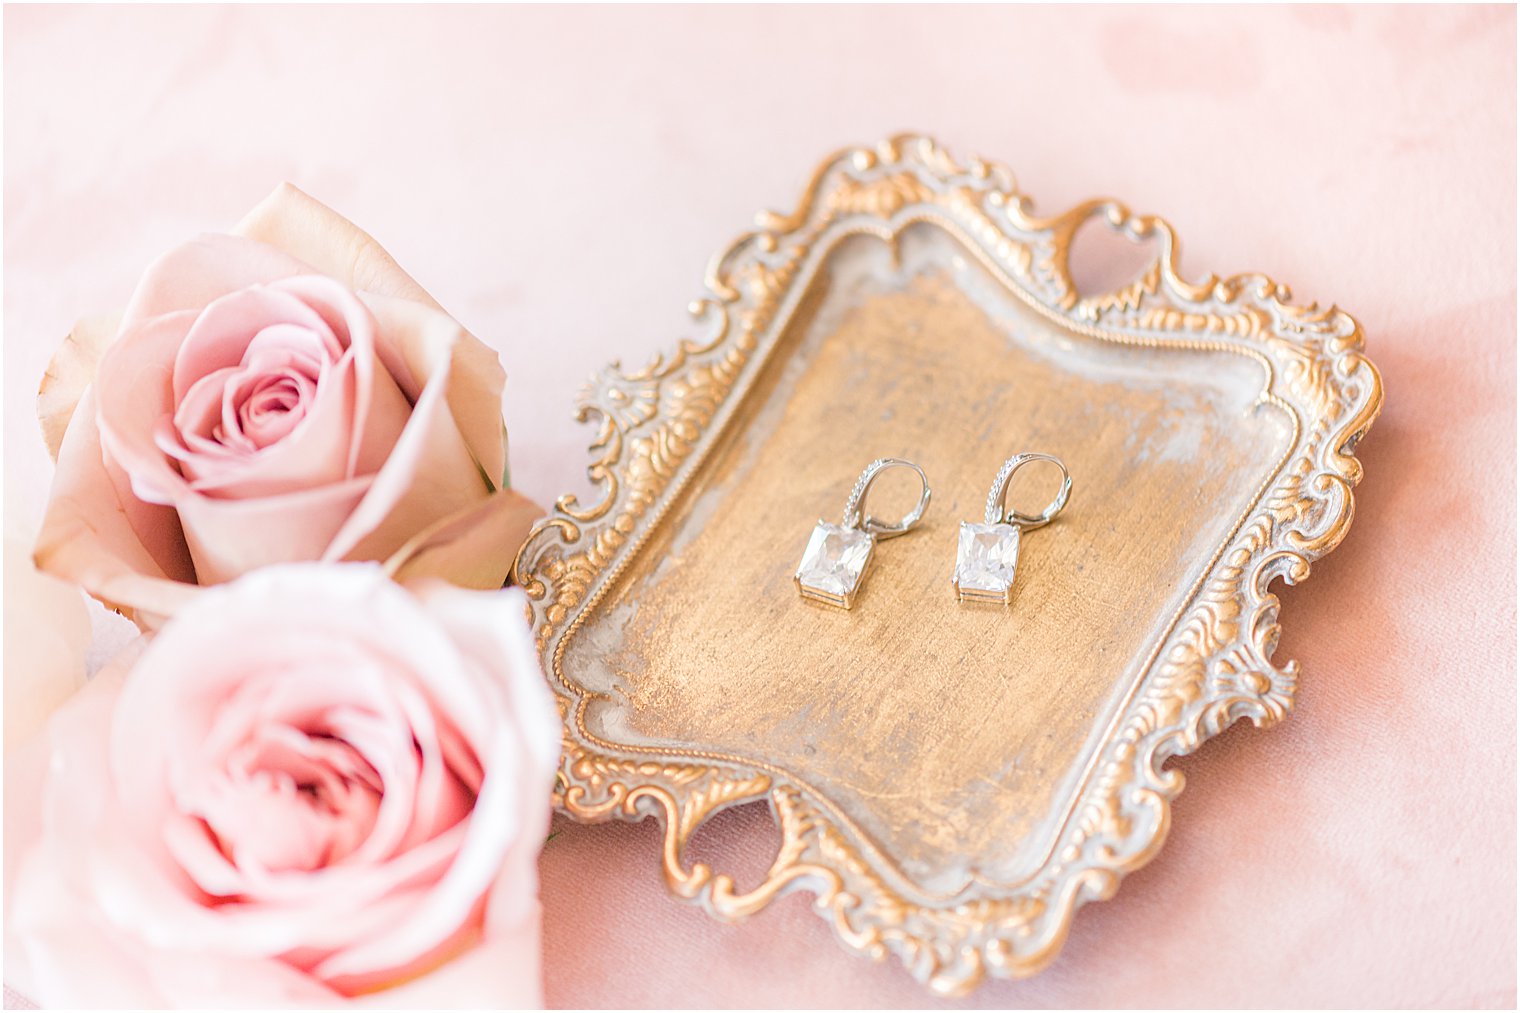 bride's jewelry lays on gold tray with pink roses